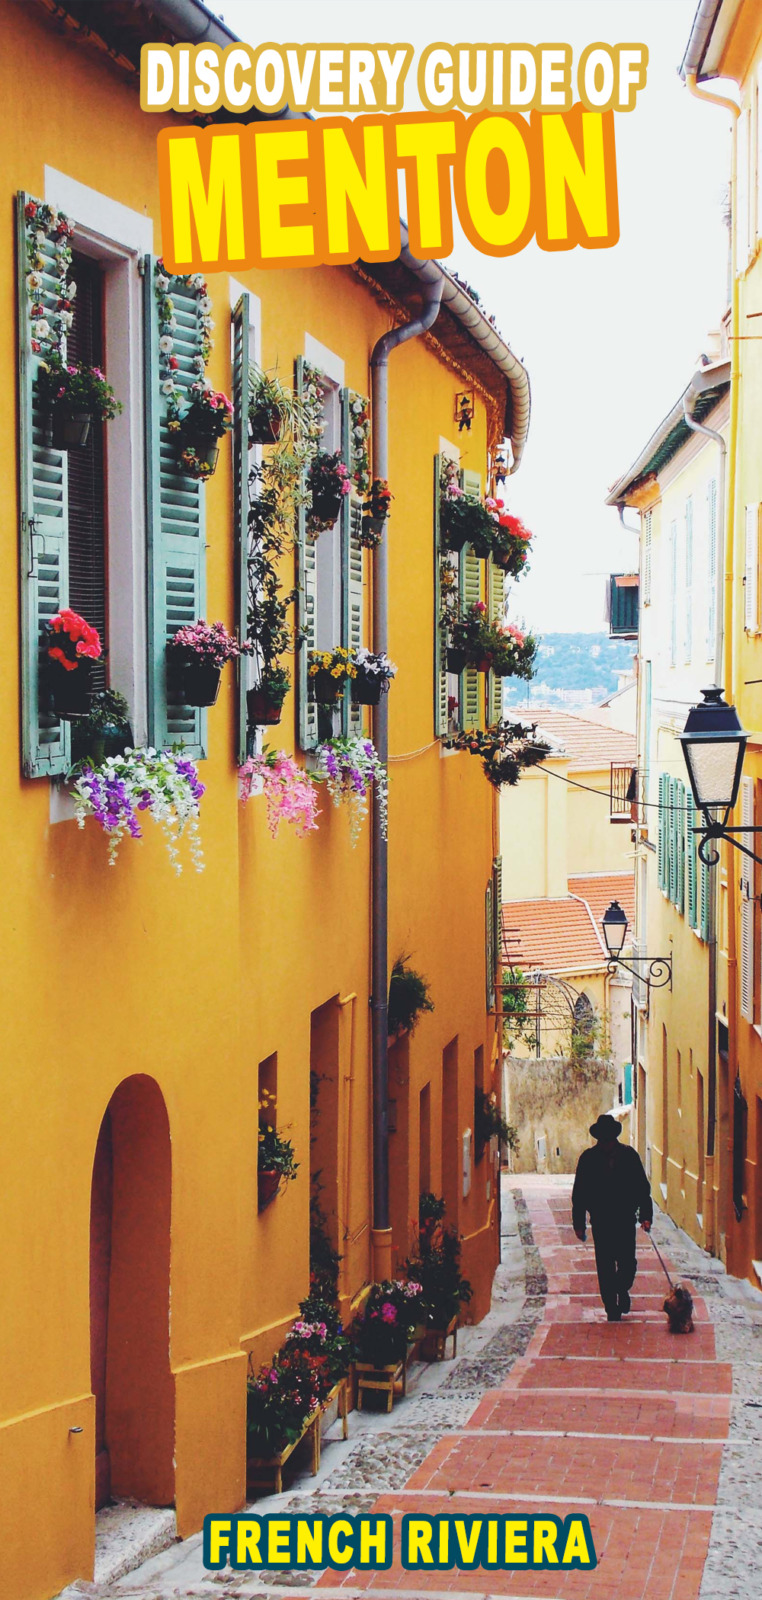 Menton, French Riviera for Pinterest by French Moments